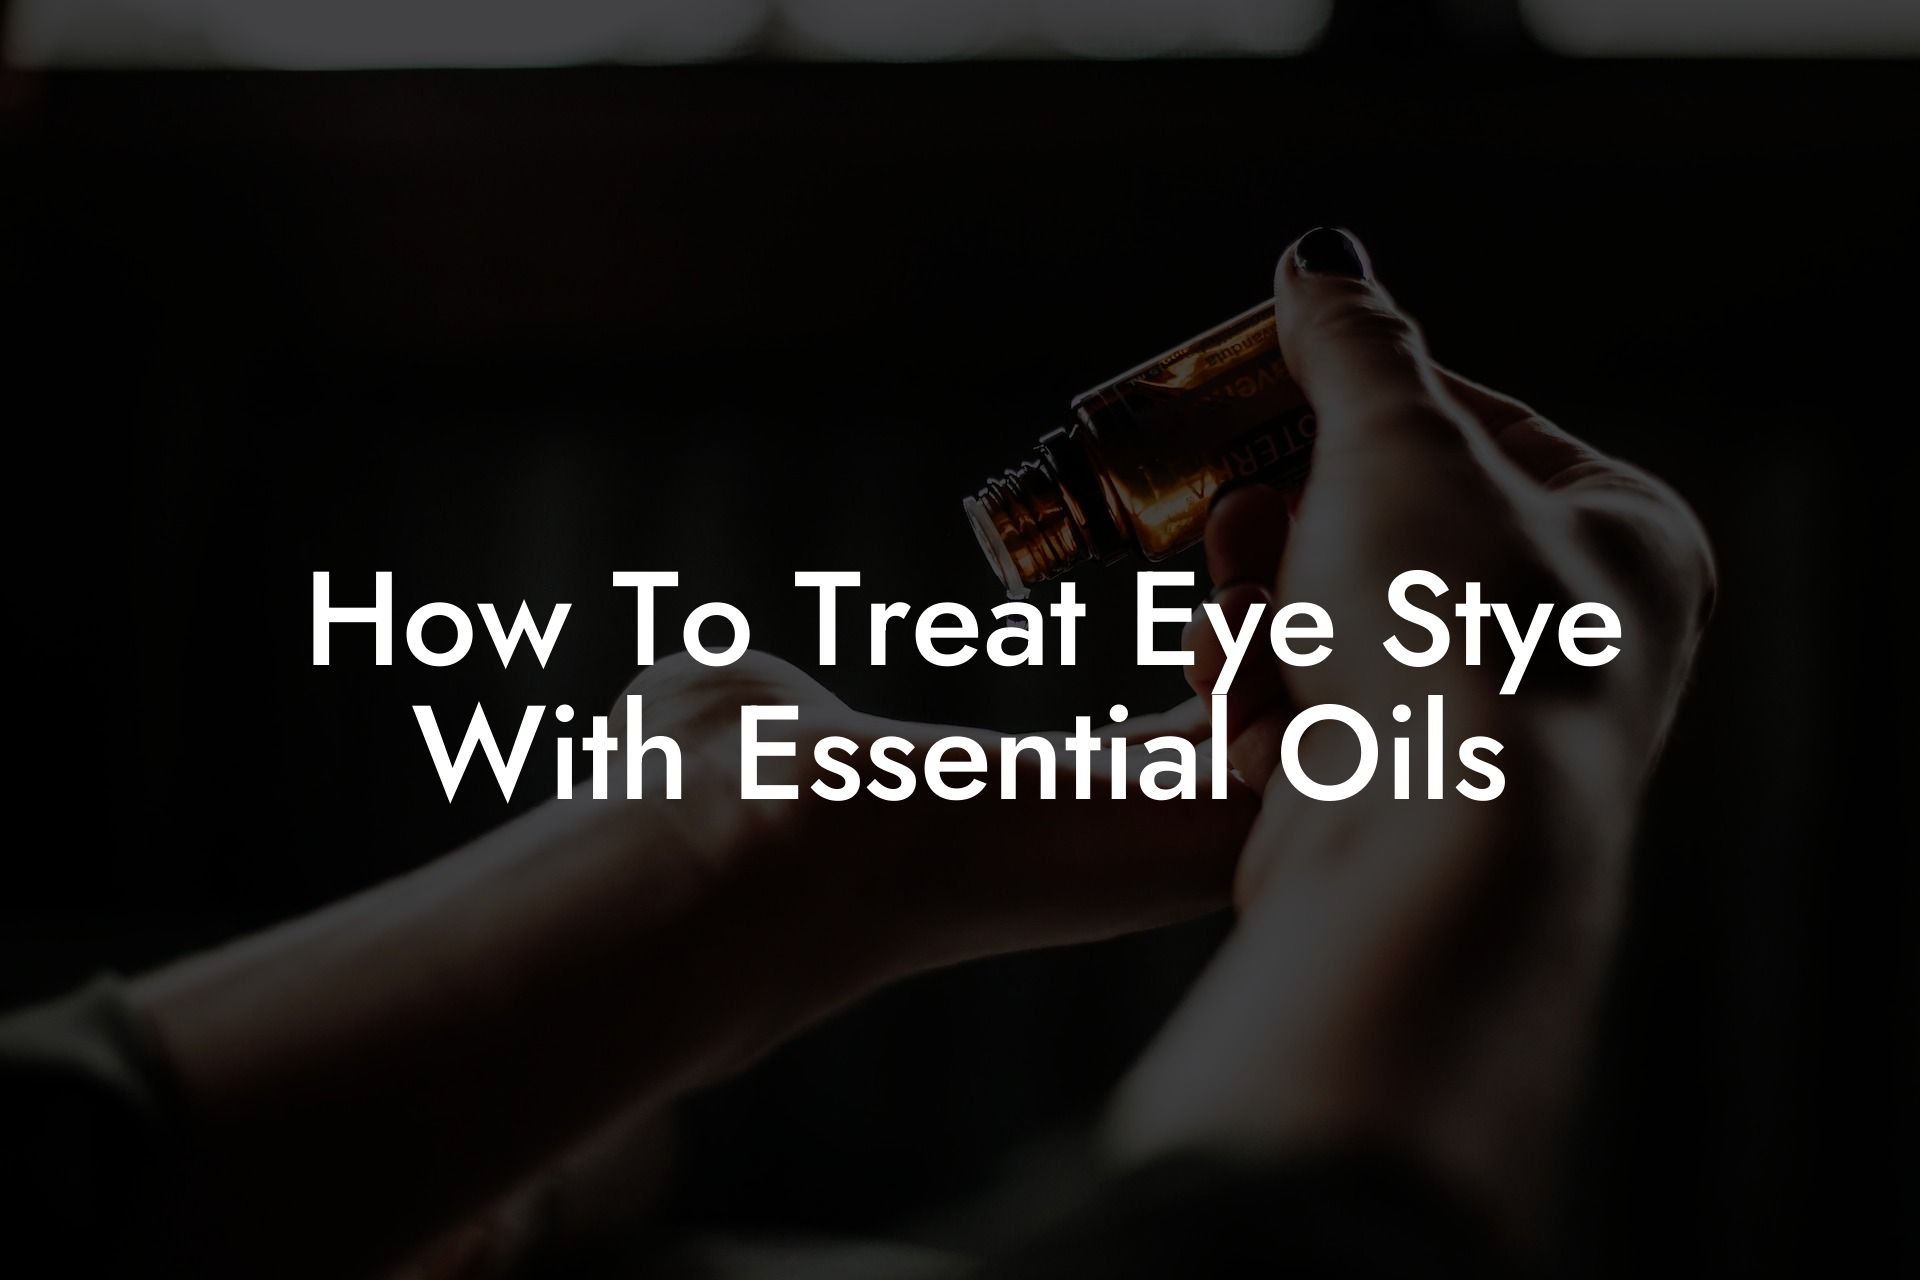 How To Treat Eye Stye With Essential Oils